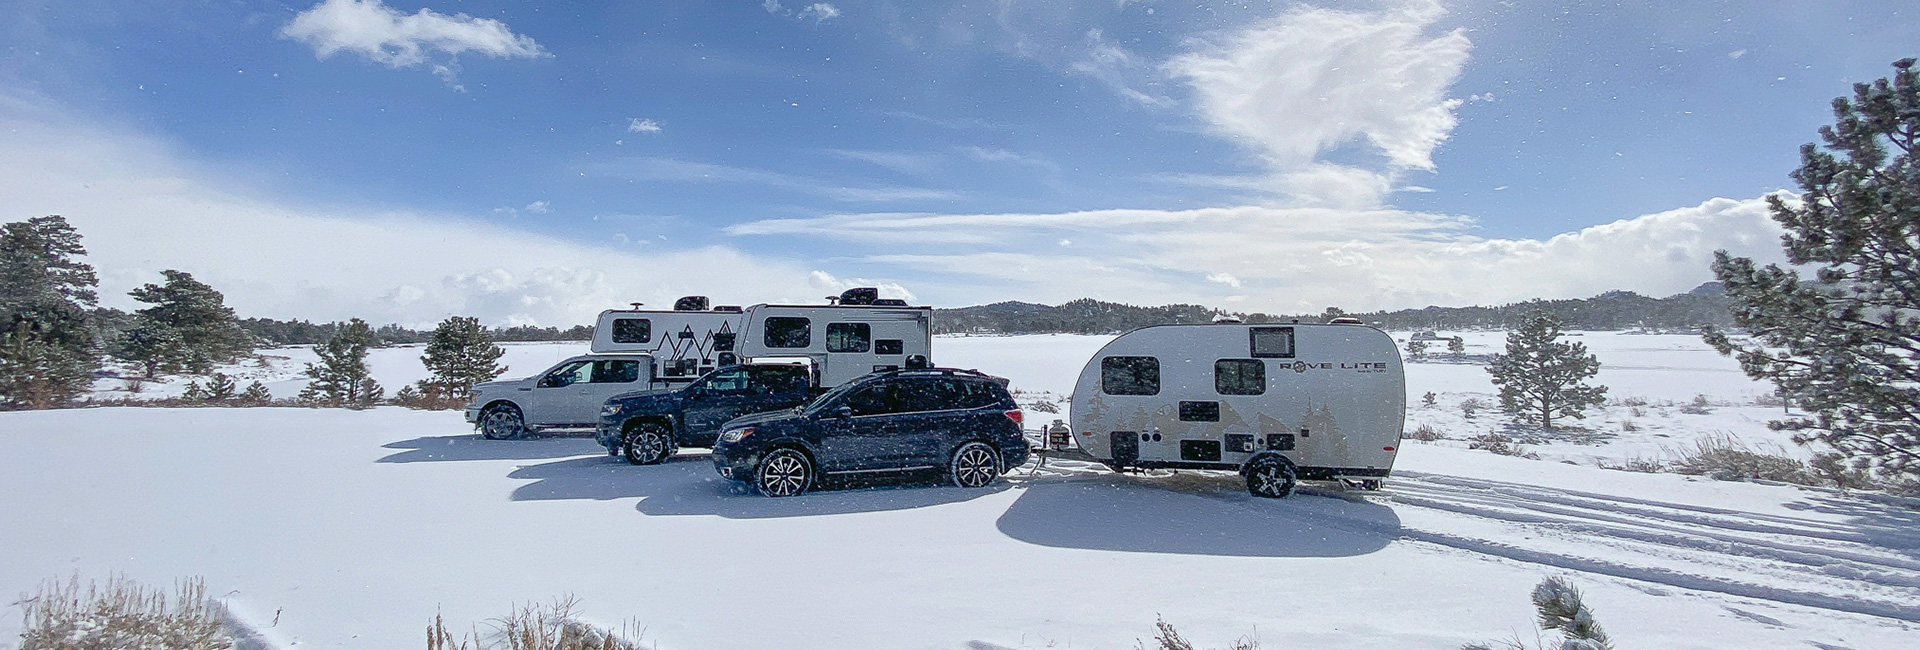 Truck campers in the snow